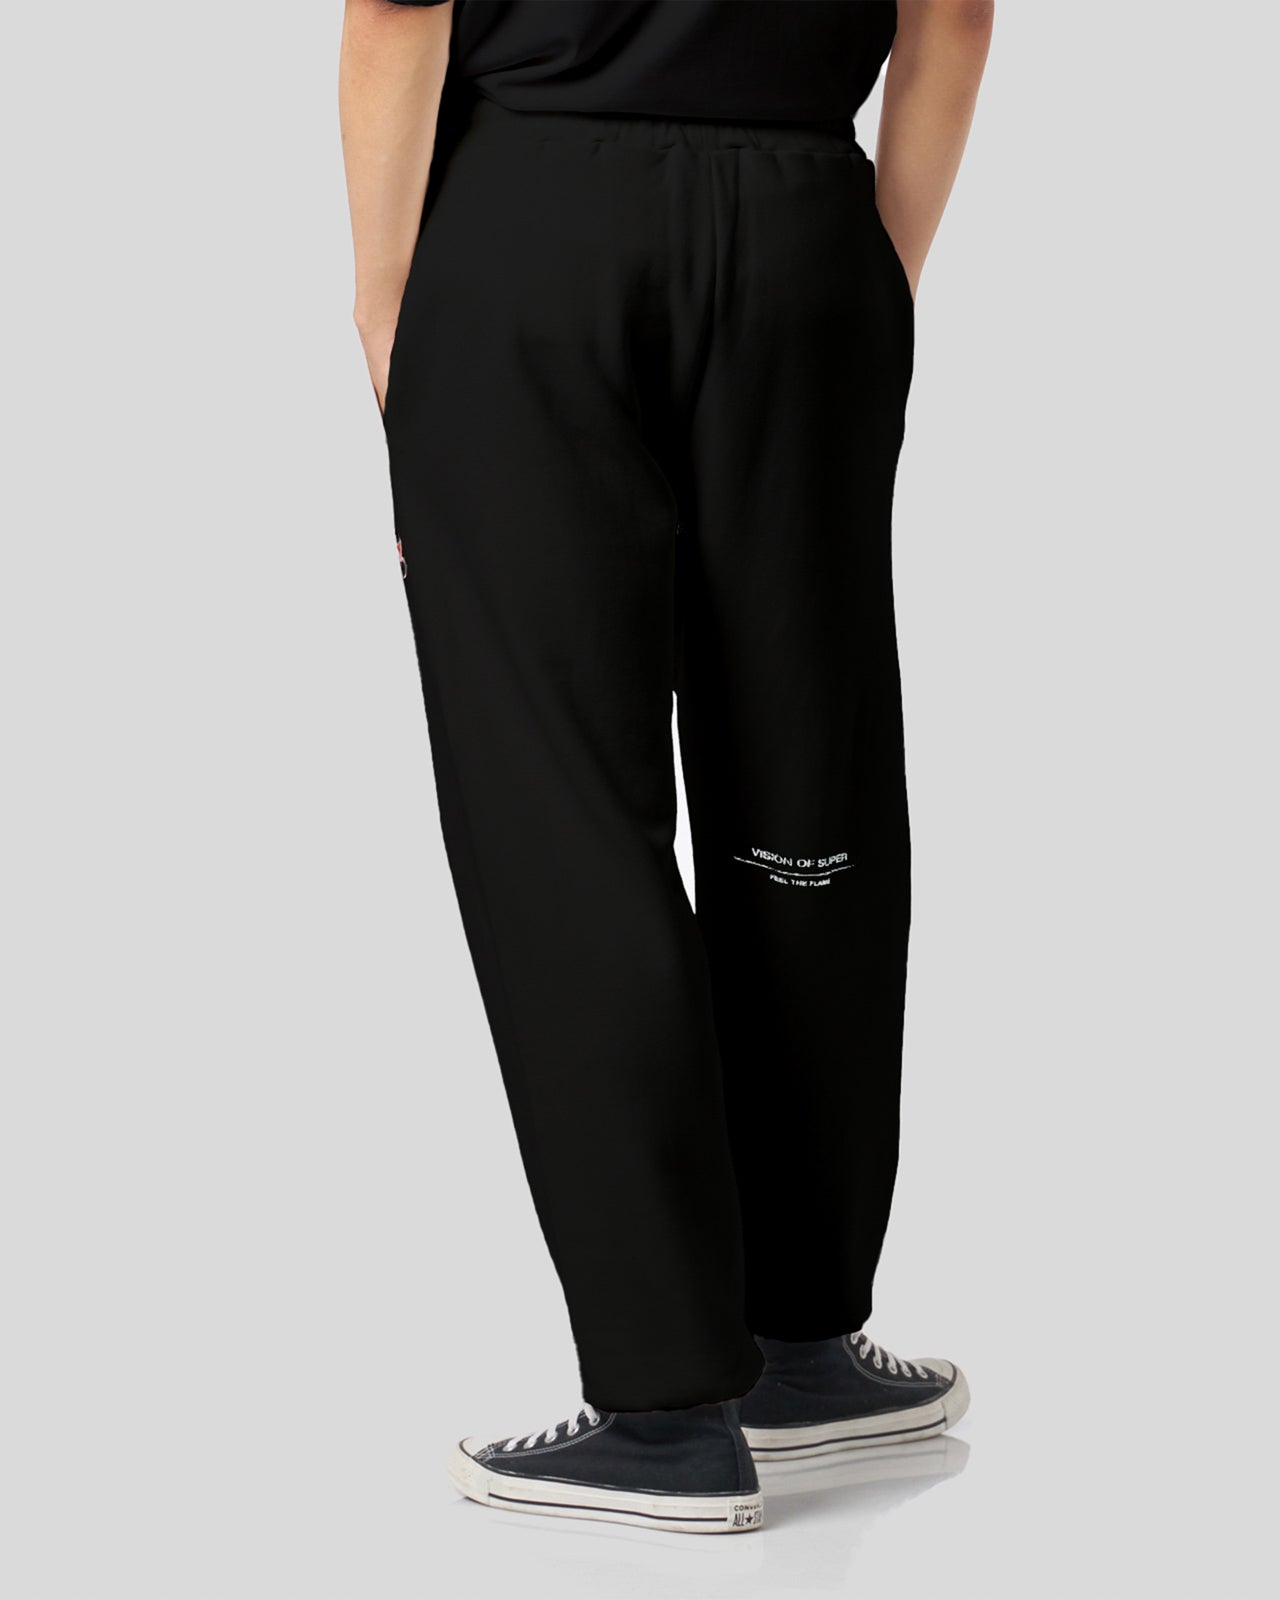 BLACK PANTS WITH FLAMES LOGO